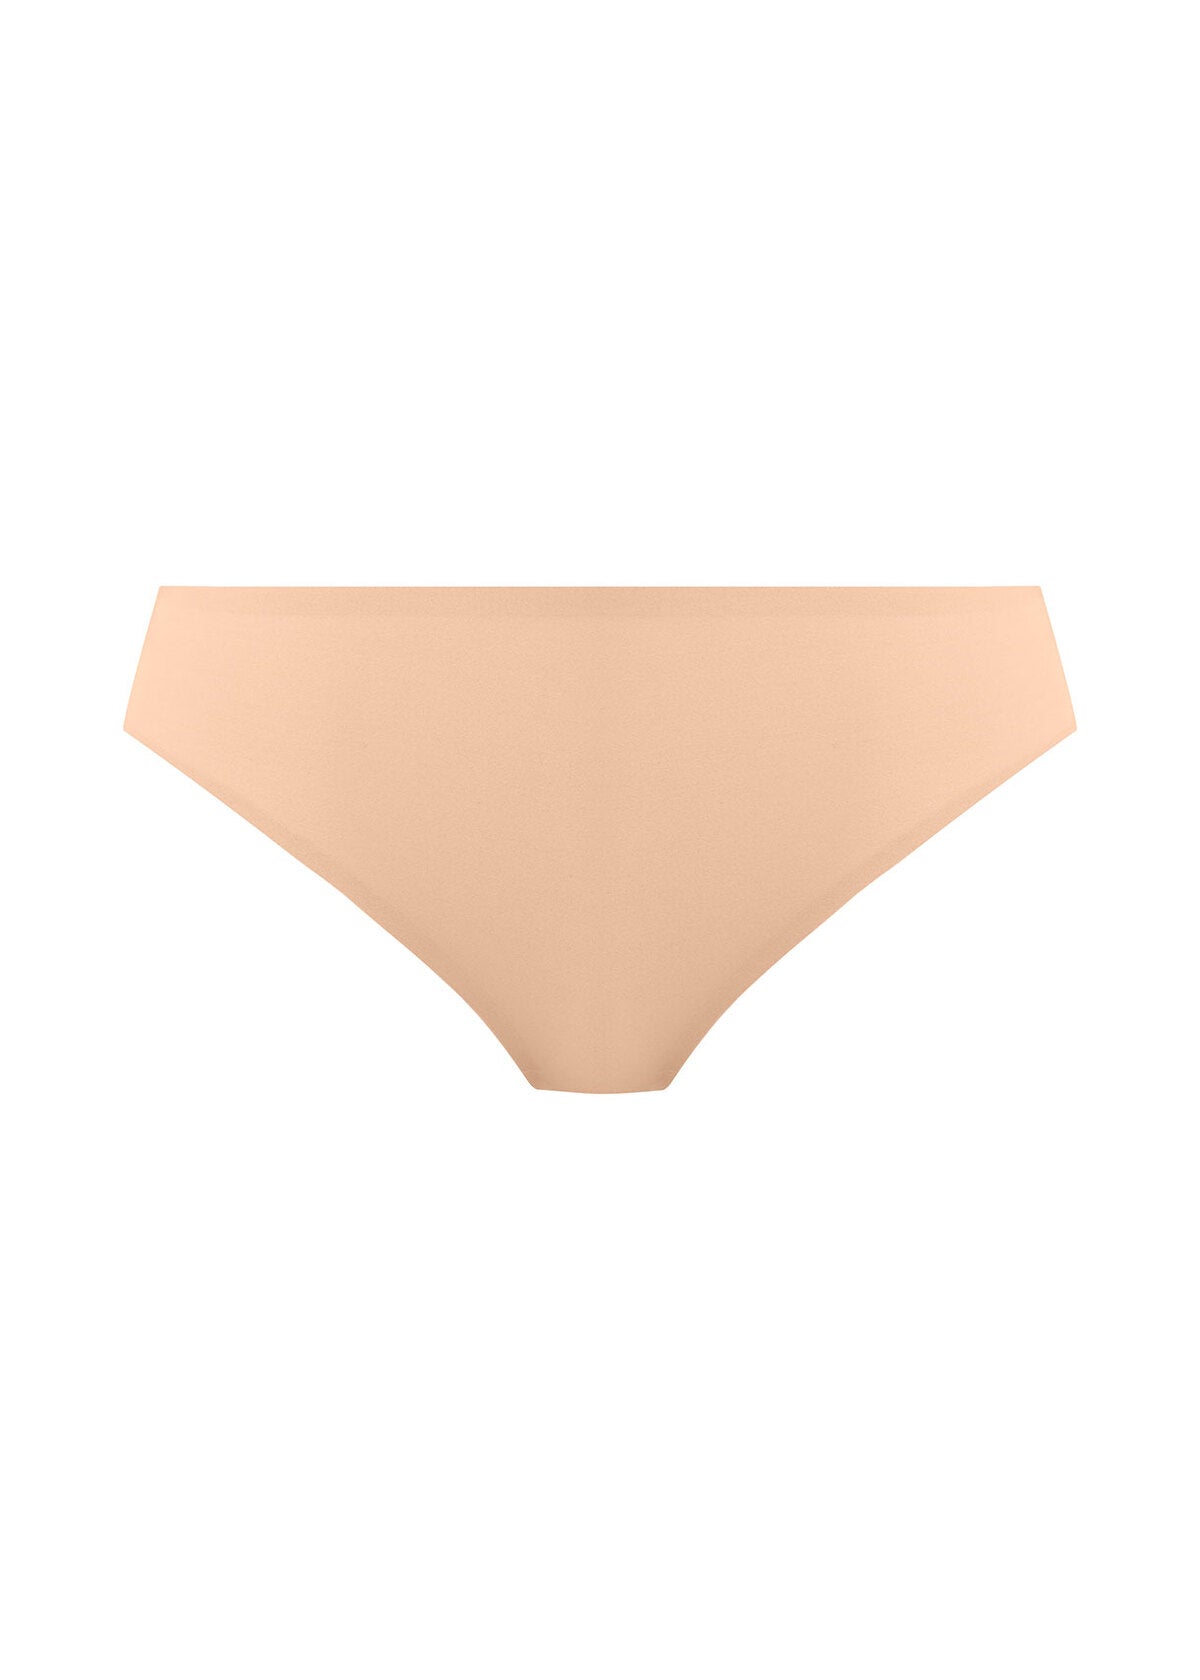 Fantasie Lace Ease Thong - Natural Beige